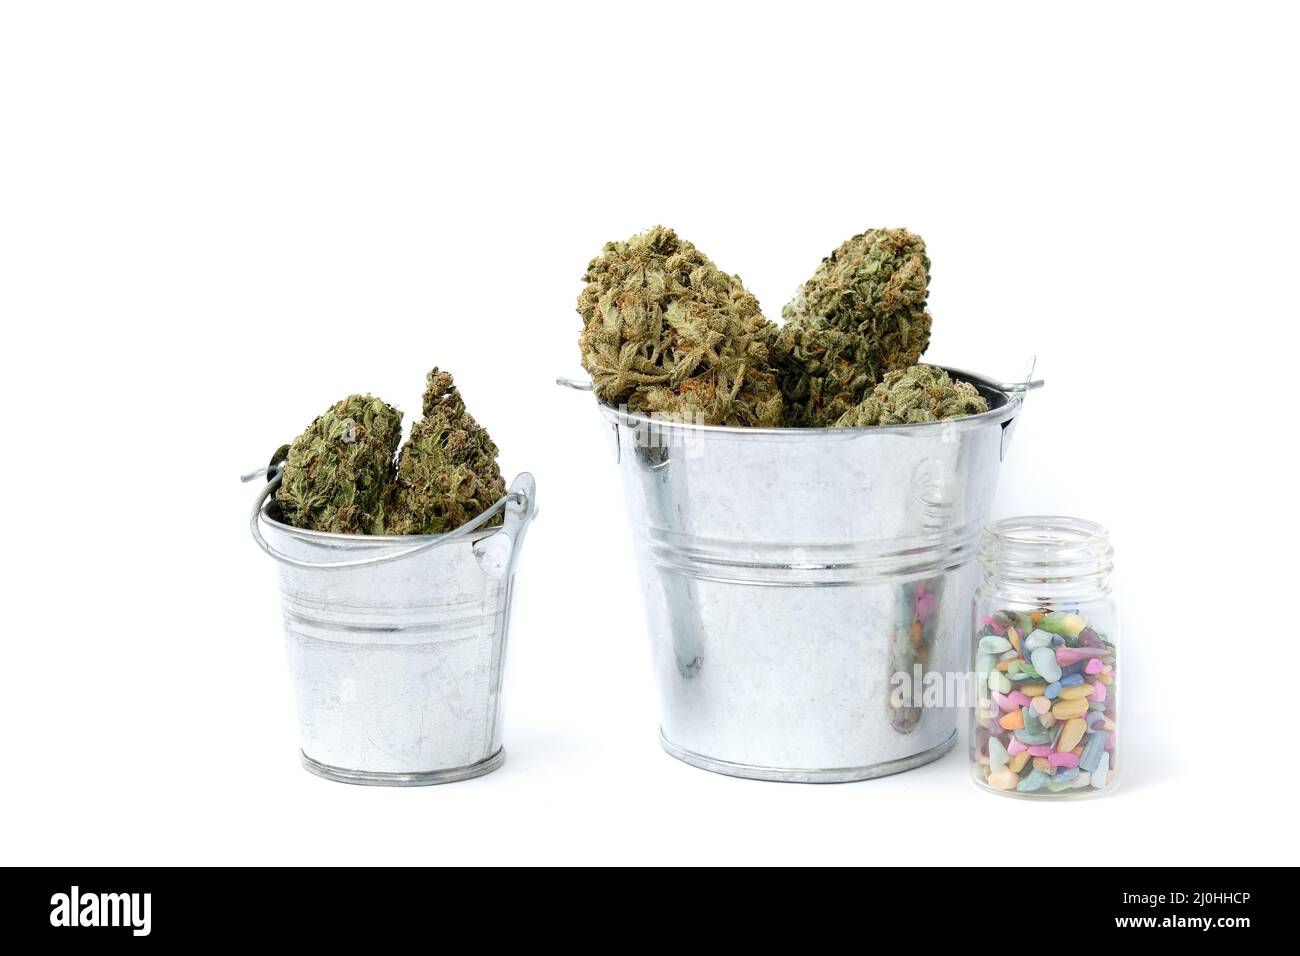 Dry marijuana in buckets and fertilizer isolated on white background. Hemp harvest concept. Productivity in cannabis industry. Stock Photo